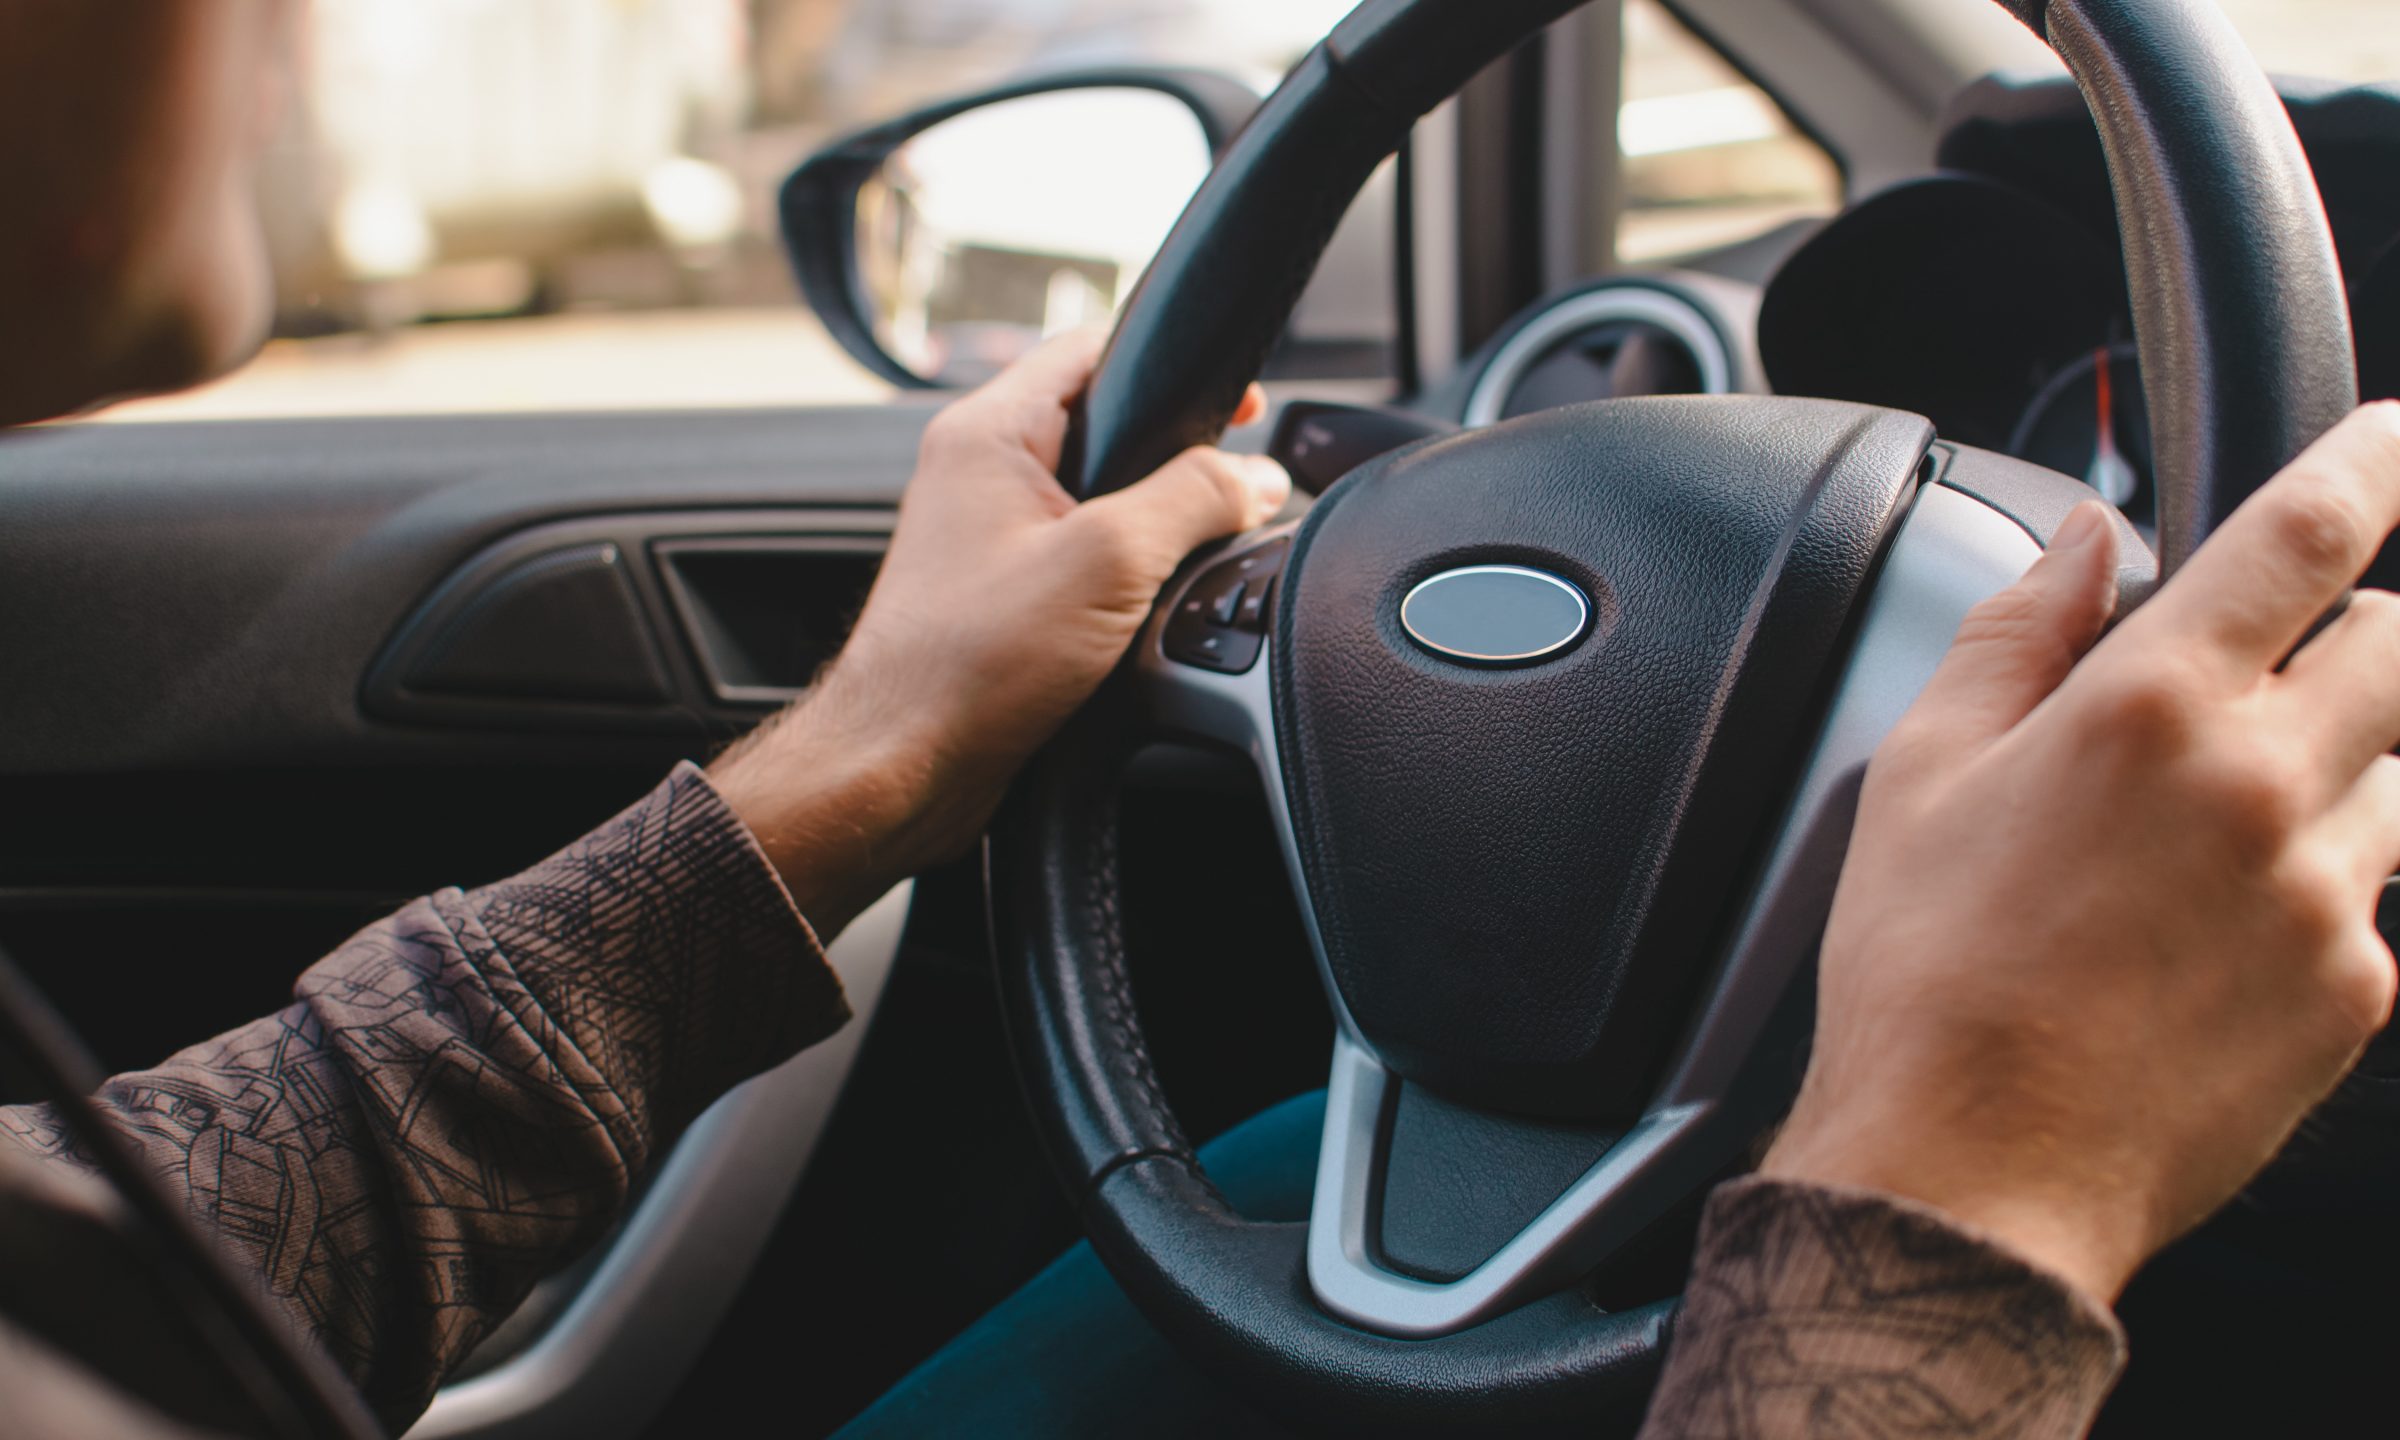 Can You Get a Preapproved Auto Loan With Bad Credit? - NerdWallet